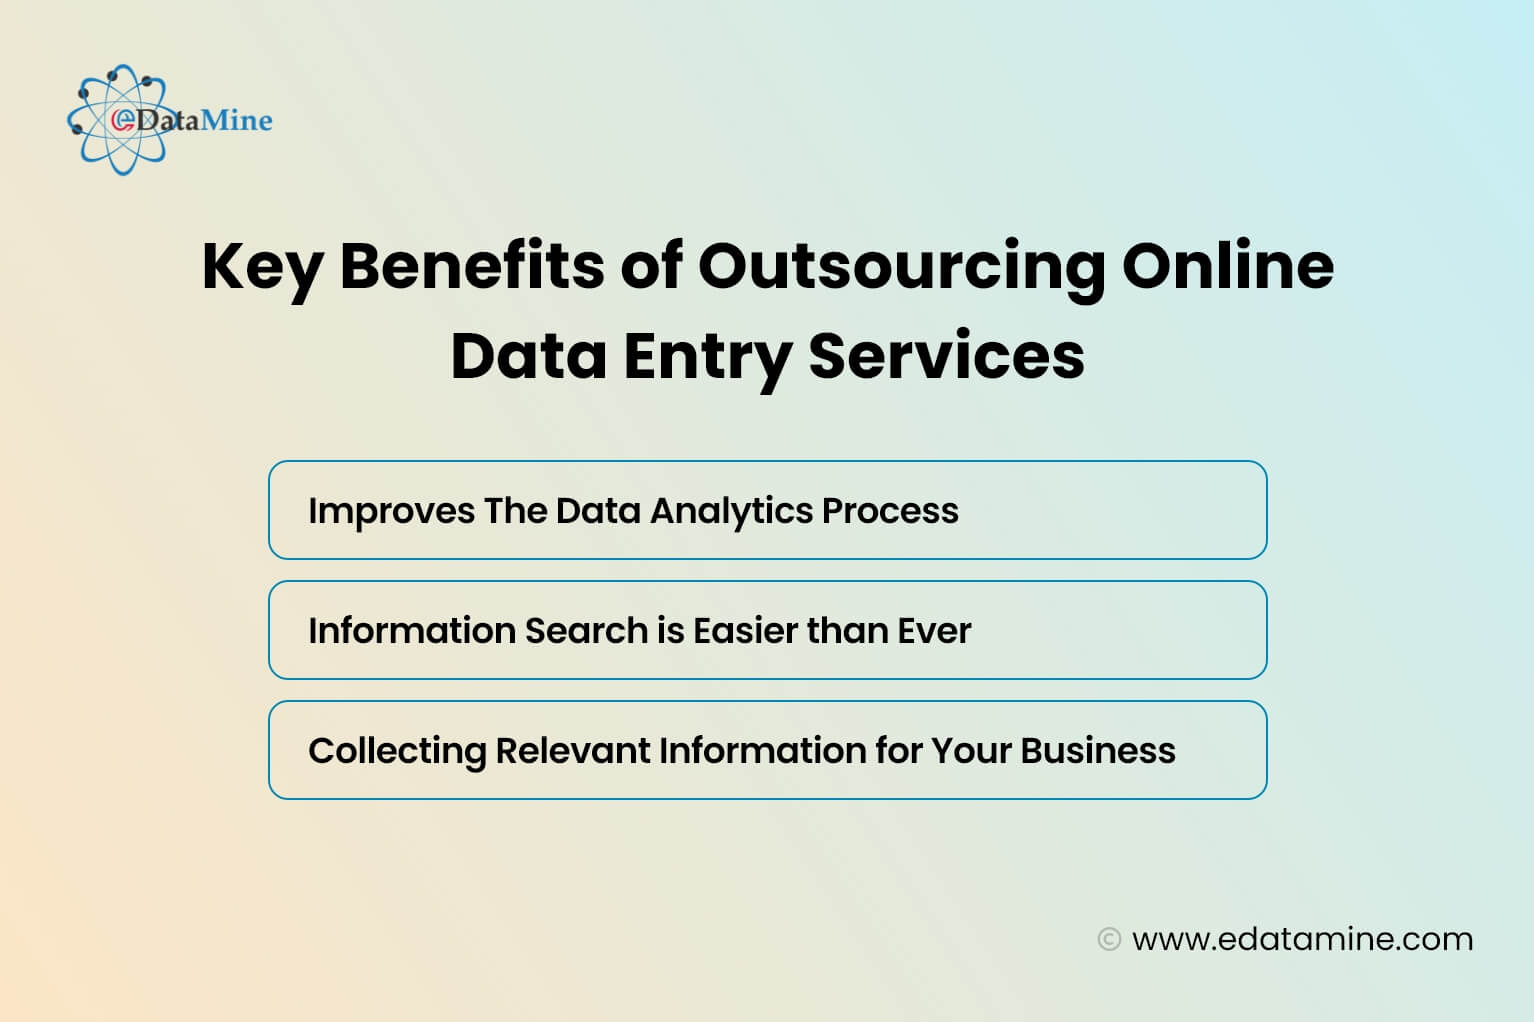 key benefits of outsourcing online data entry services